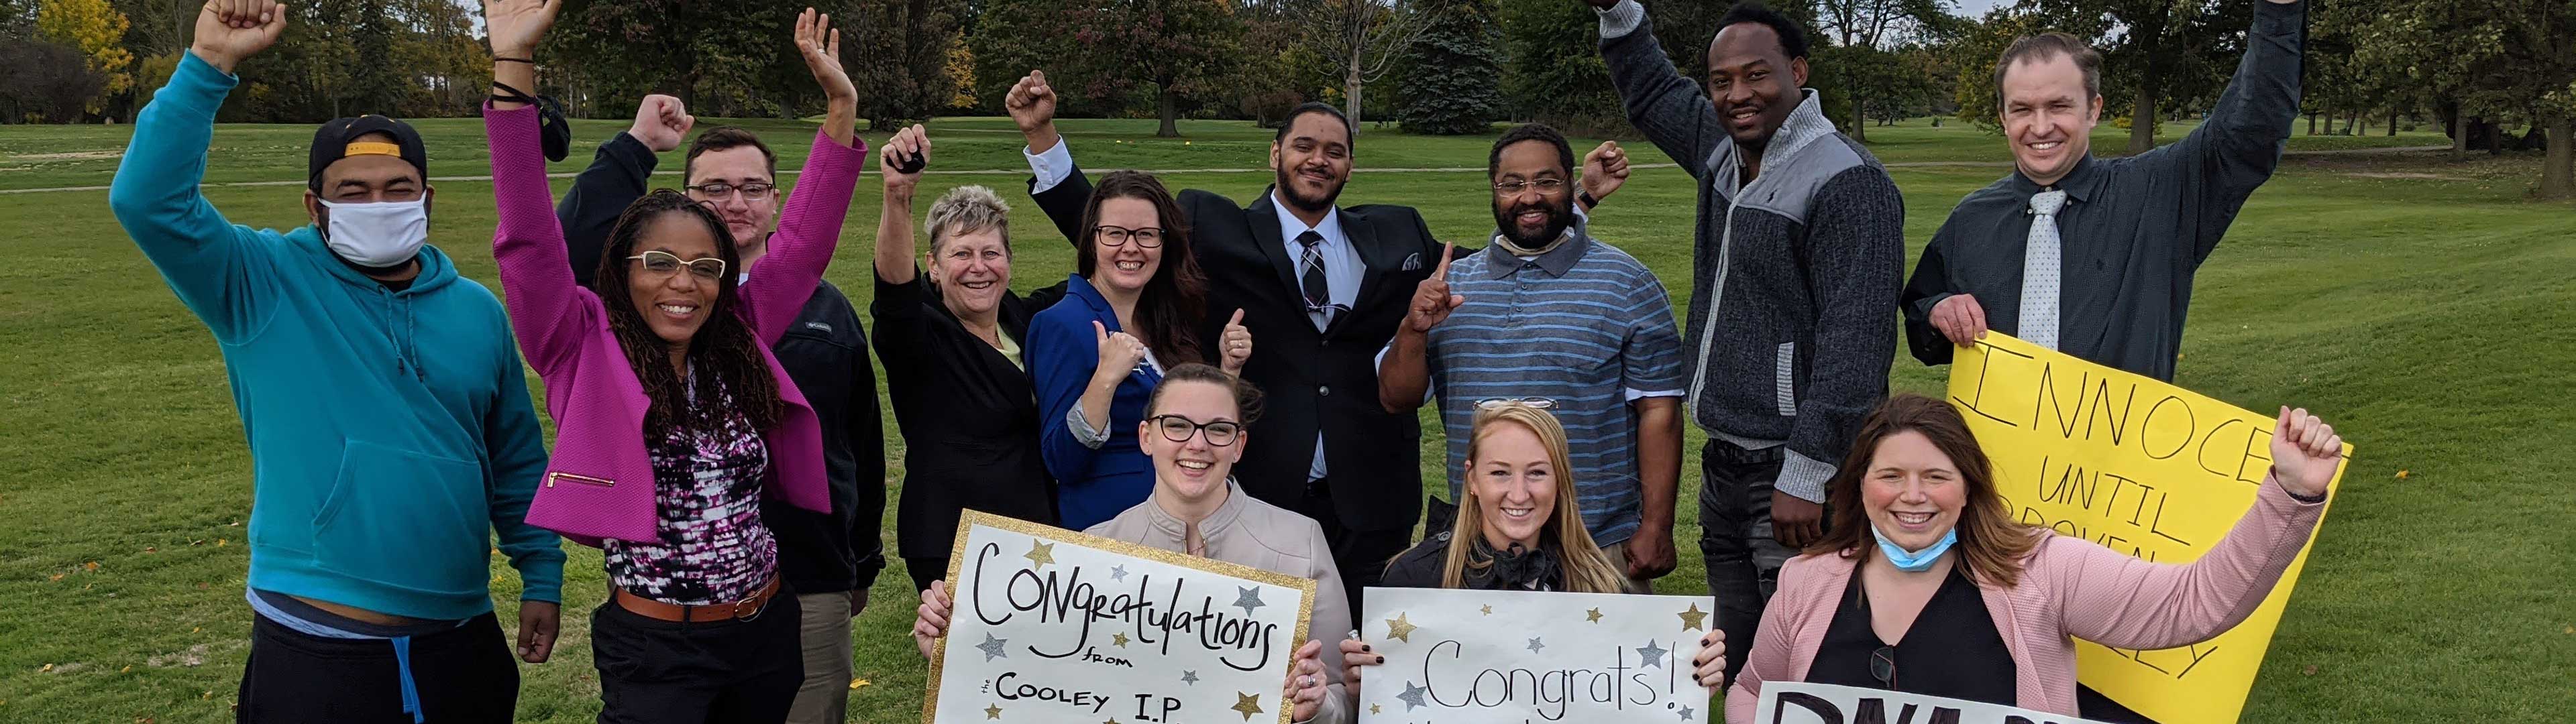 Commitment to Social Justice and Access at WMU Cooley Law School